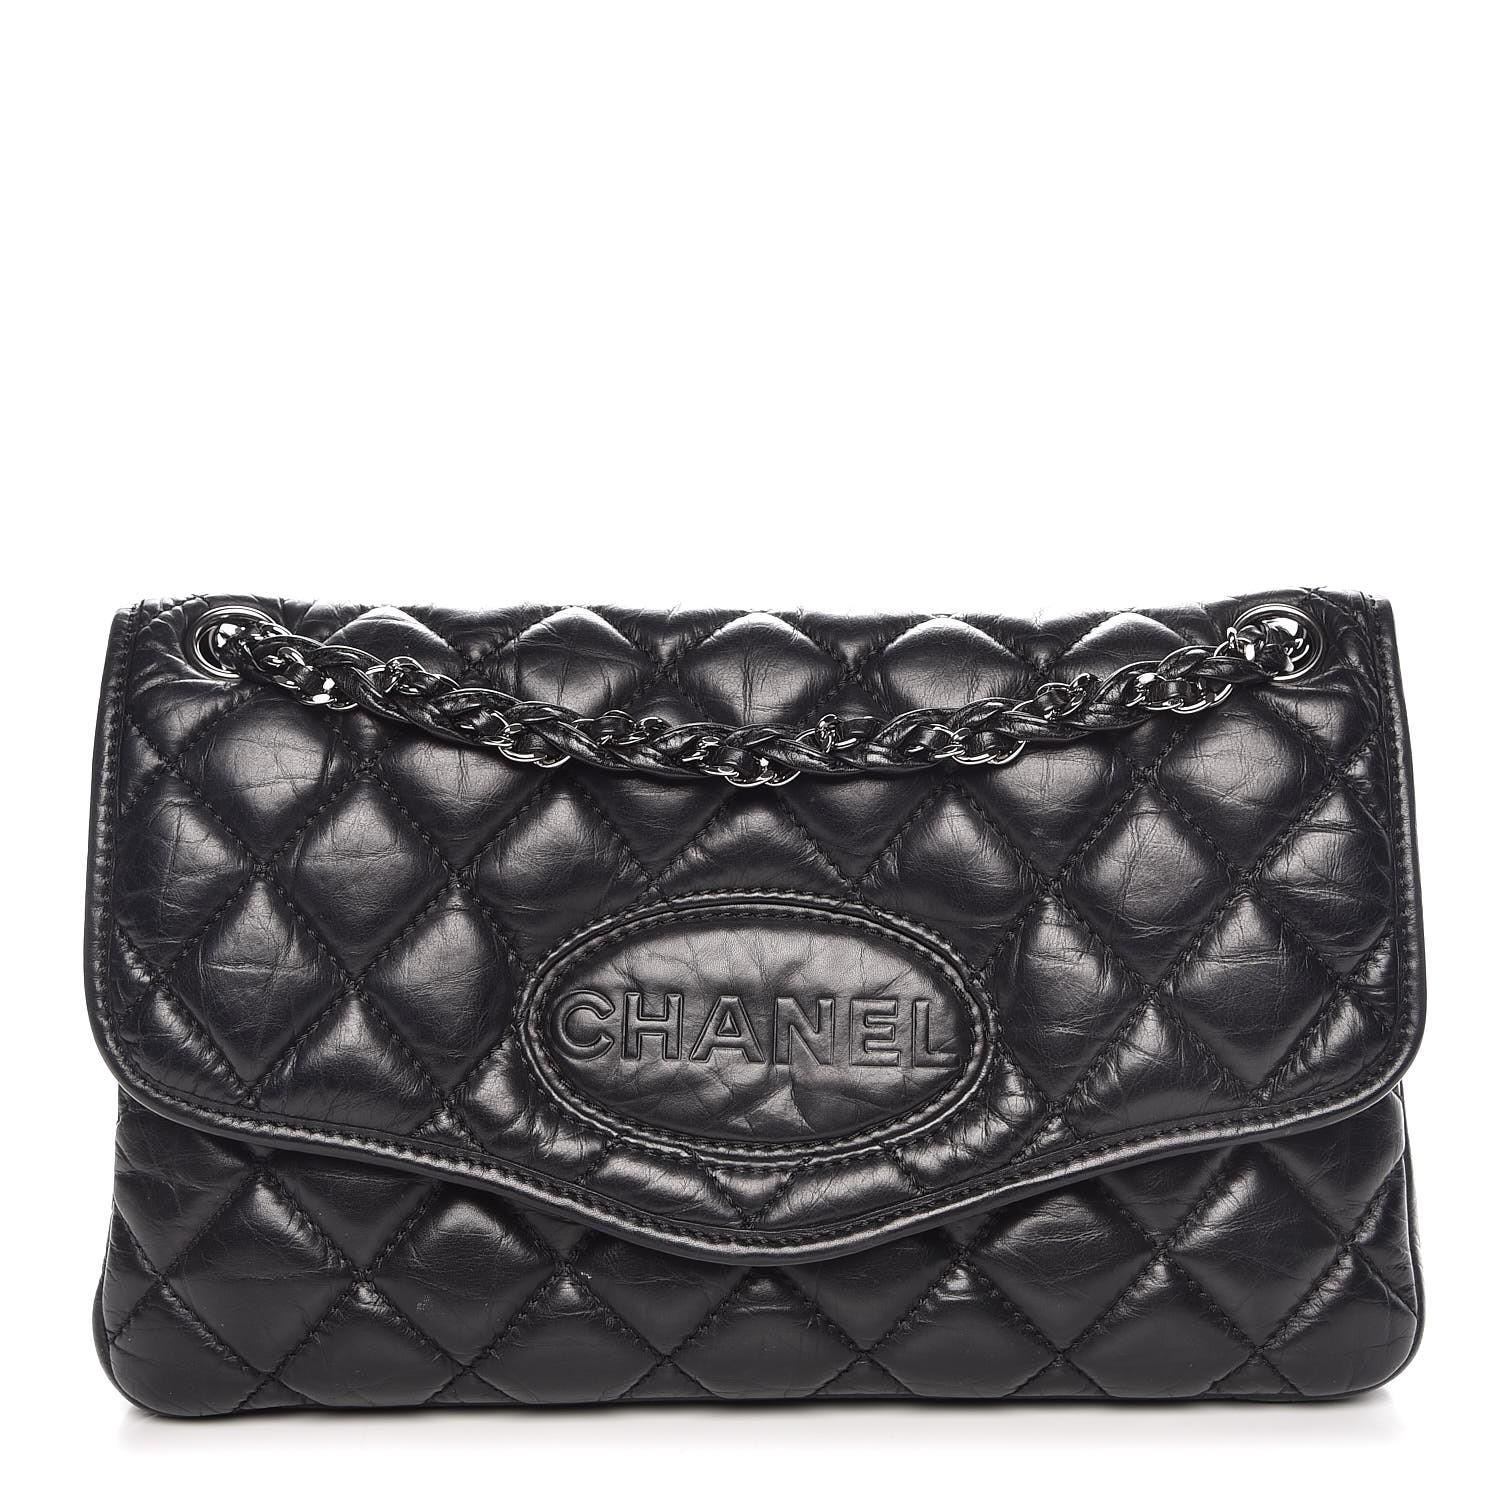 Chanel 2005 Vintage Soft Distressed Leather Diamond Quilted Classic Flap Bag In Good Condition For Sale In Miami, FL